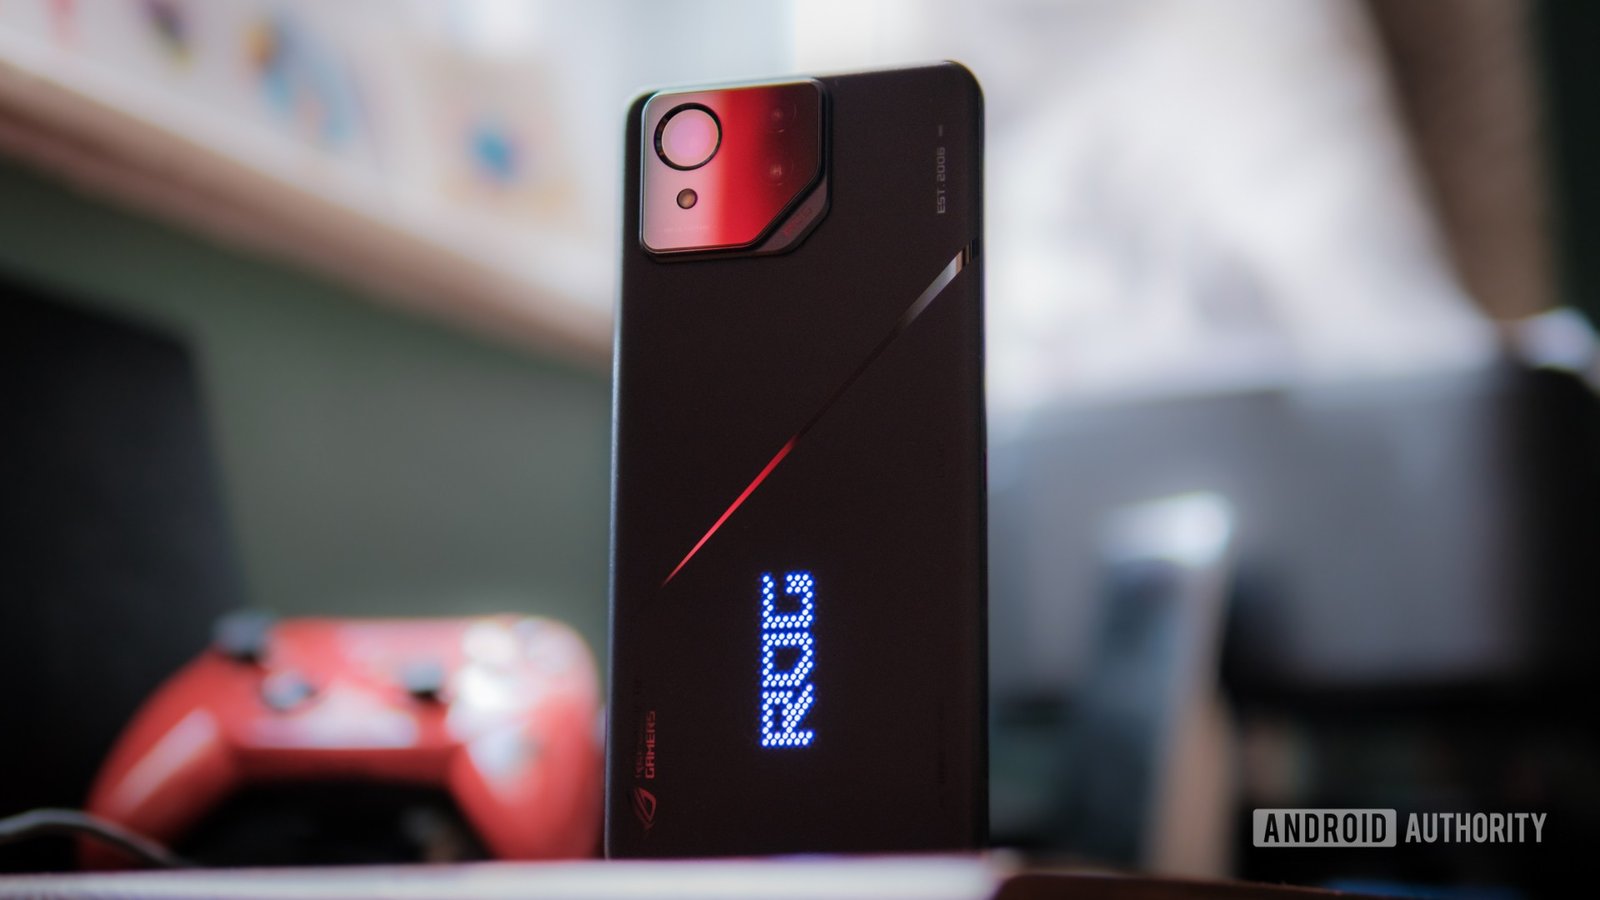 A classier style of gaming phone